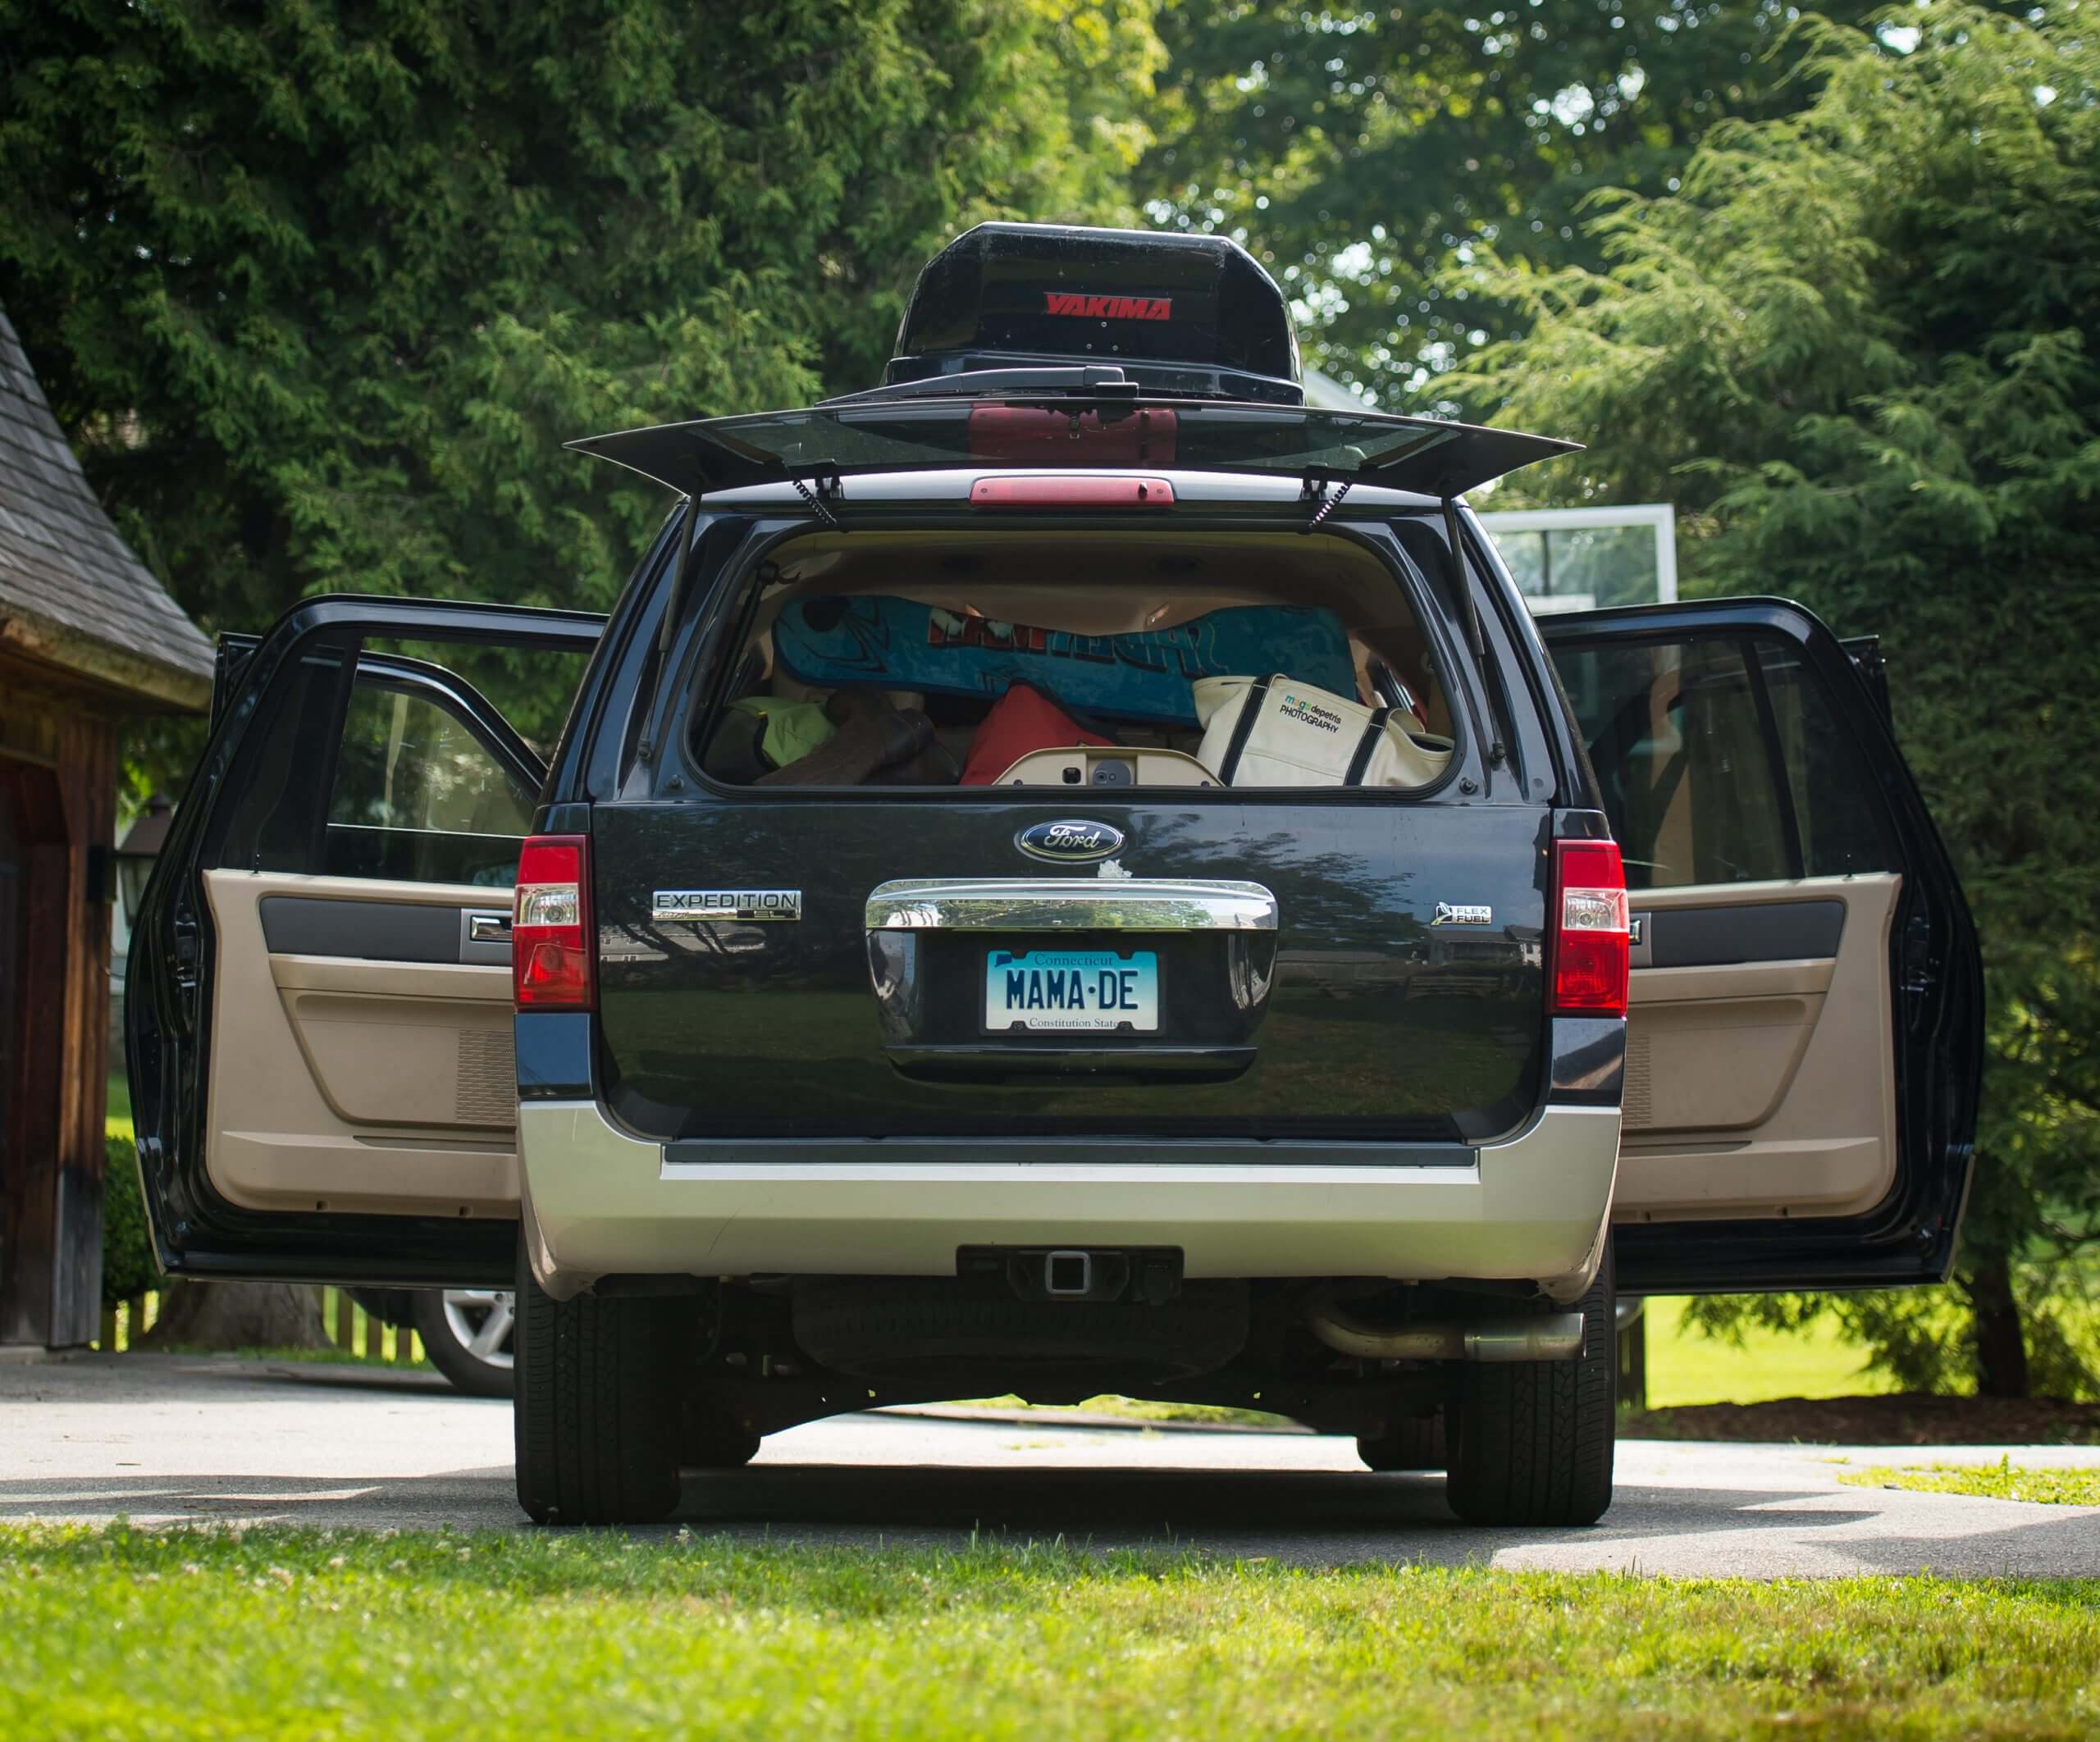 A parked Ford Explorer is packed with items and all four doors are open.